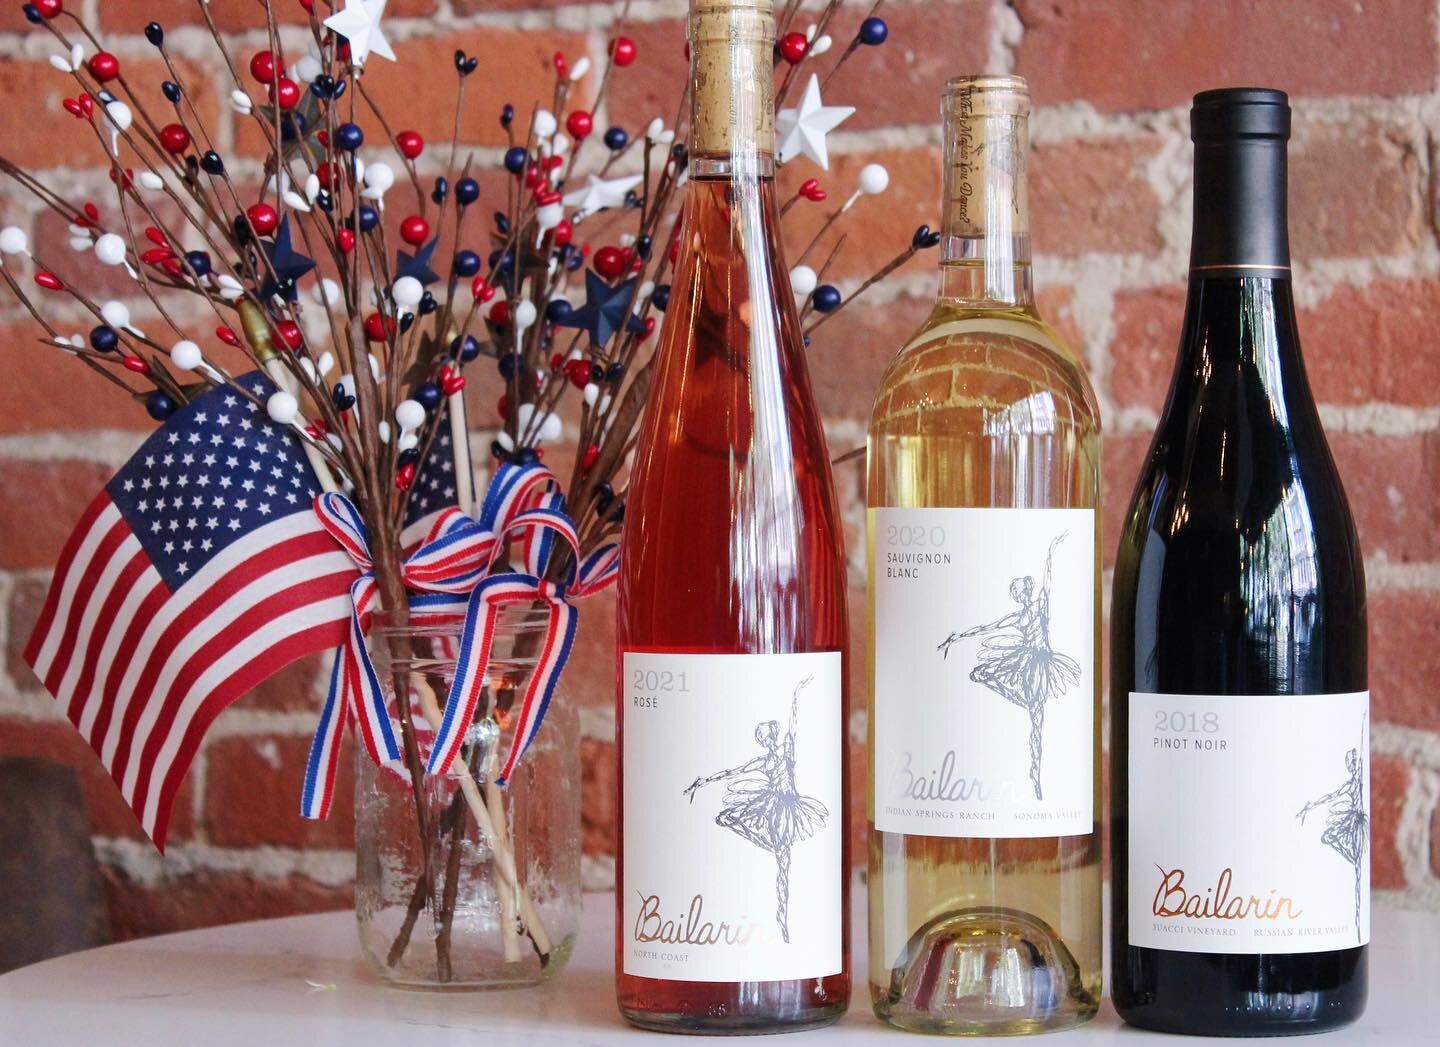 Happy 4th of July 🎆 

Take your BBQ and summer fun to the next level with our amazing selection.

&bull;2017 Suacci Pinot Noir
&bull;2018 Manchester Ridge Chardonnay
&bull;2018 Russian River Valley Chardonnay

&bull;Use code 'USA20' for 20% off when